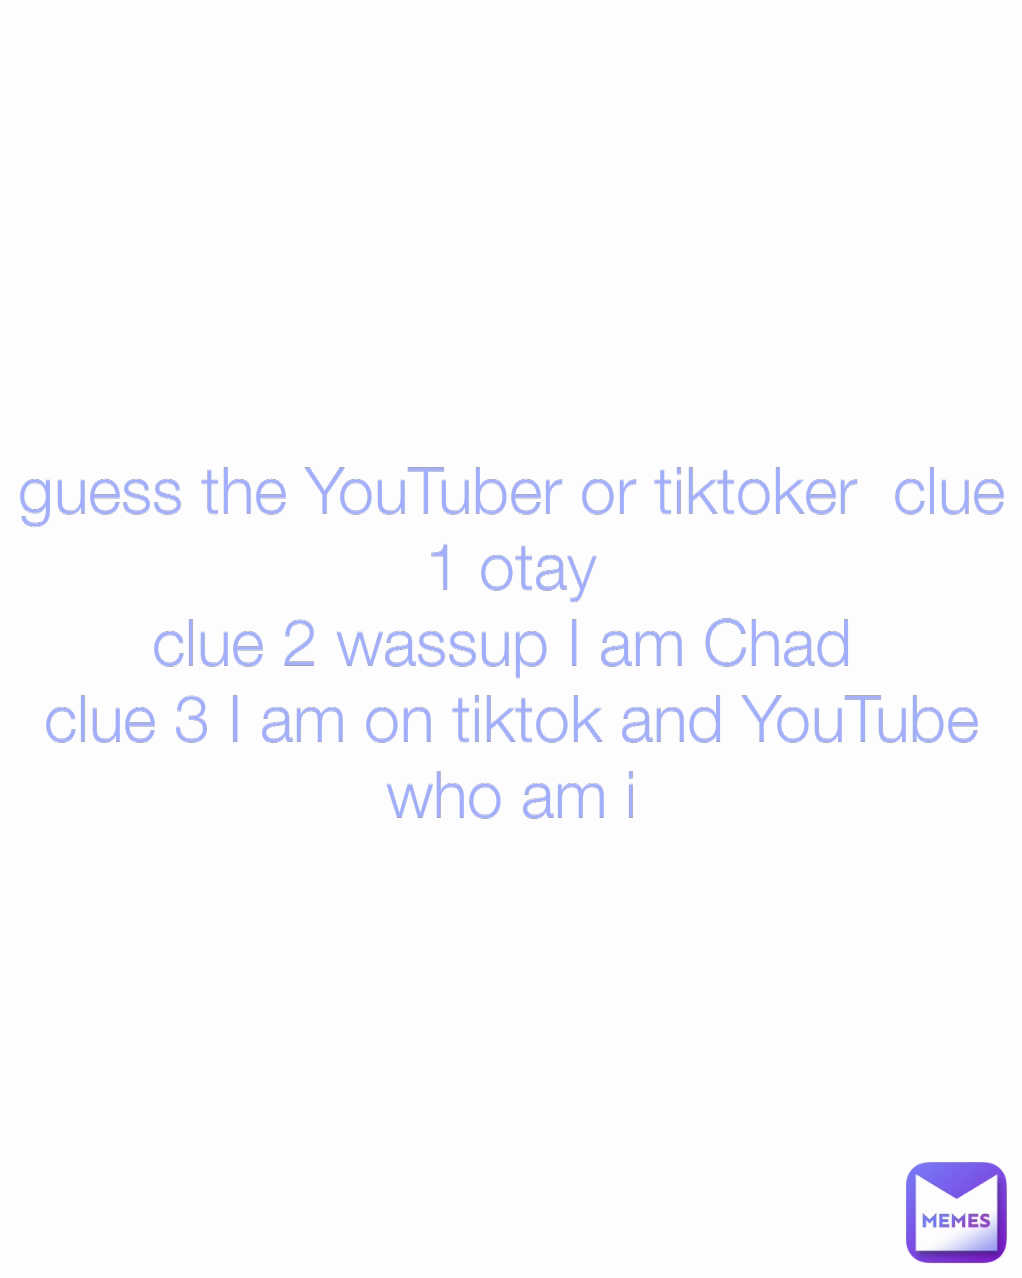 guess the YouTuber or tiktoker  clue 1 otay
clue 2 wassup I am Chad 
clue 3 I am on tiktok and YouTube
who am i